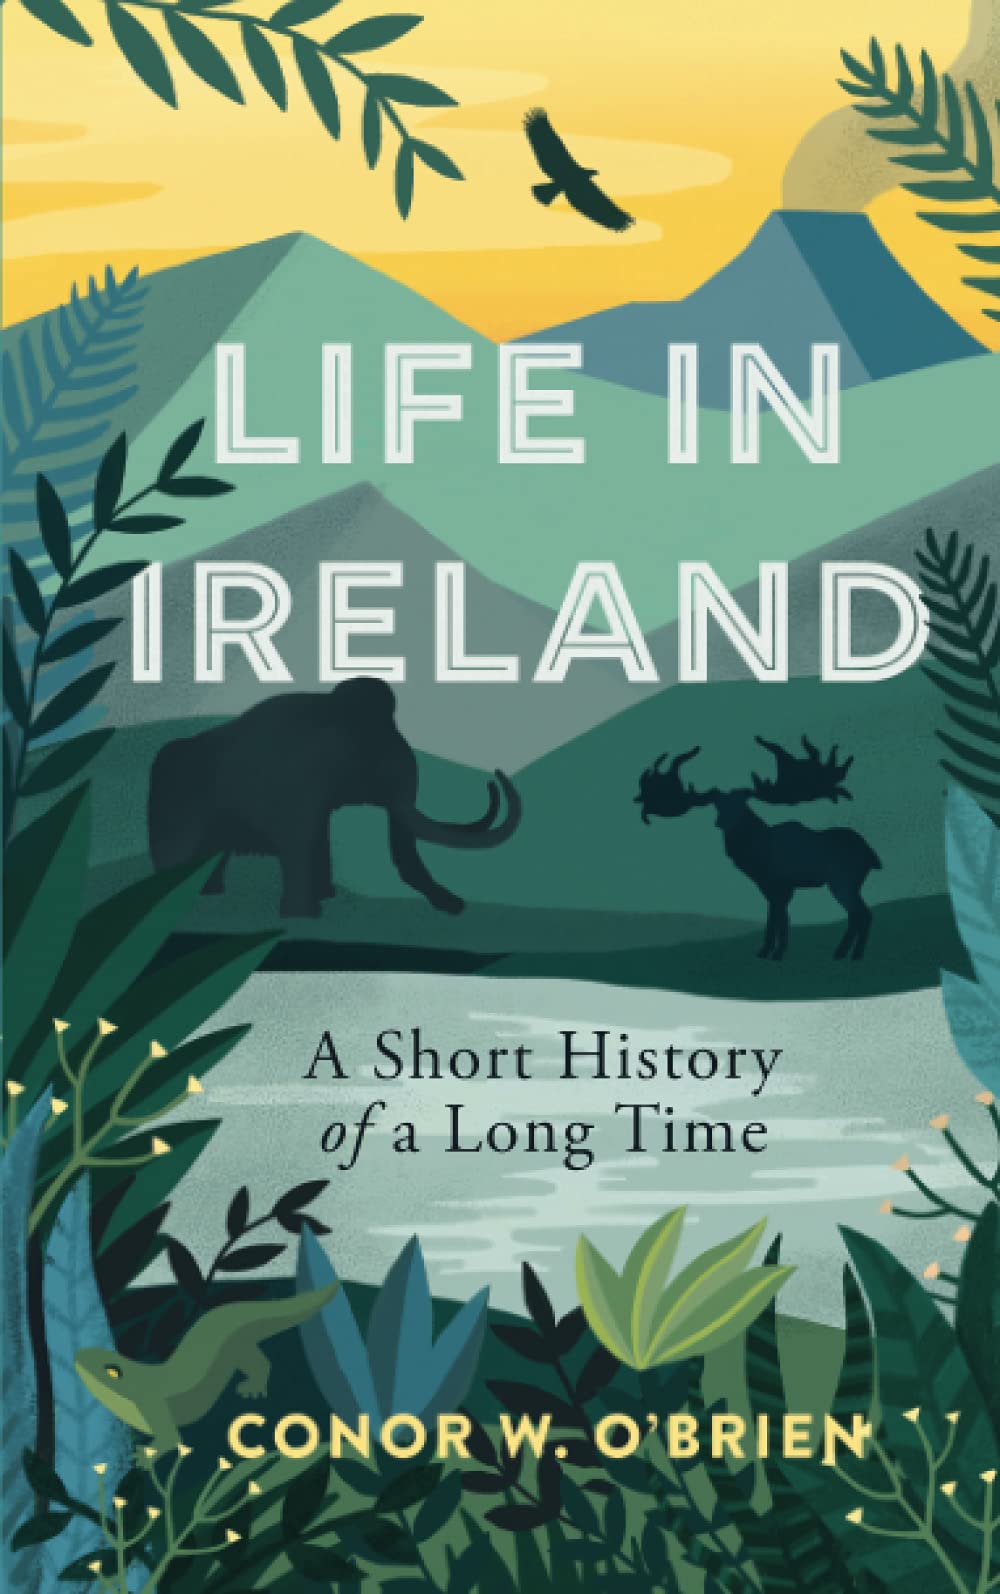 Life in Ireland, A Short Story of a Long Time - Conor W. O'Brien